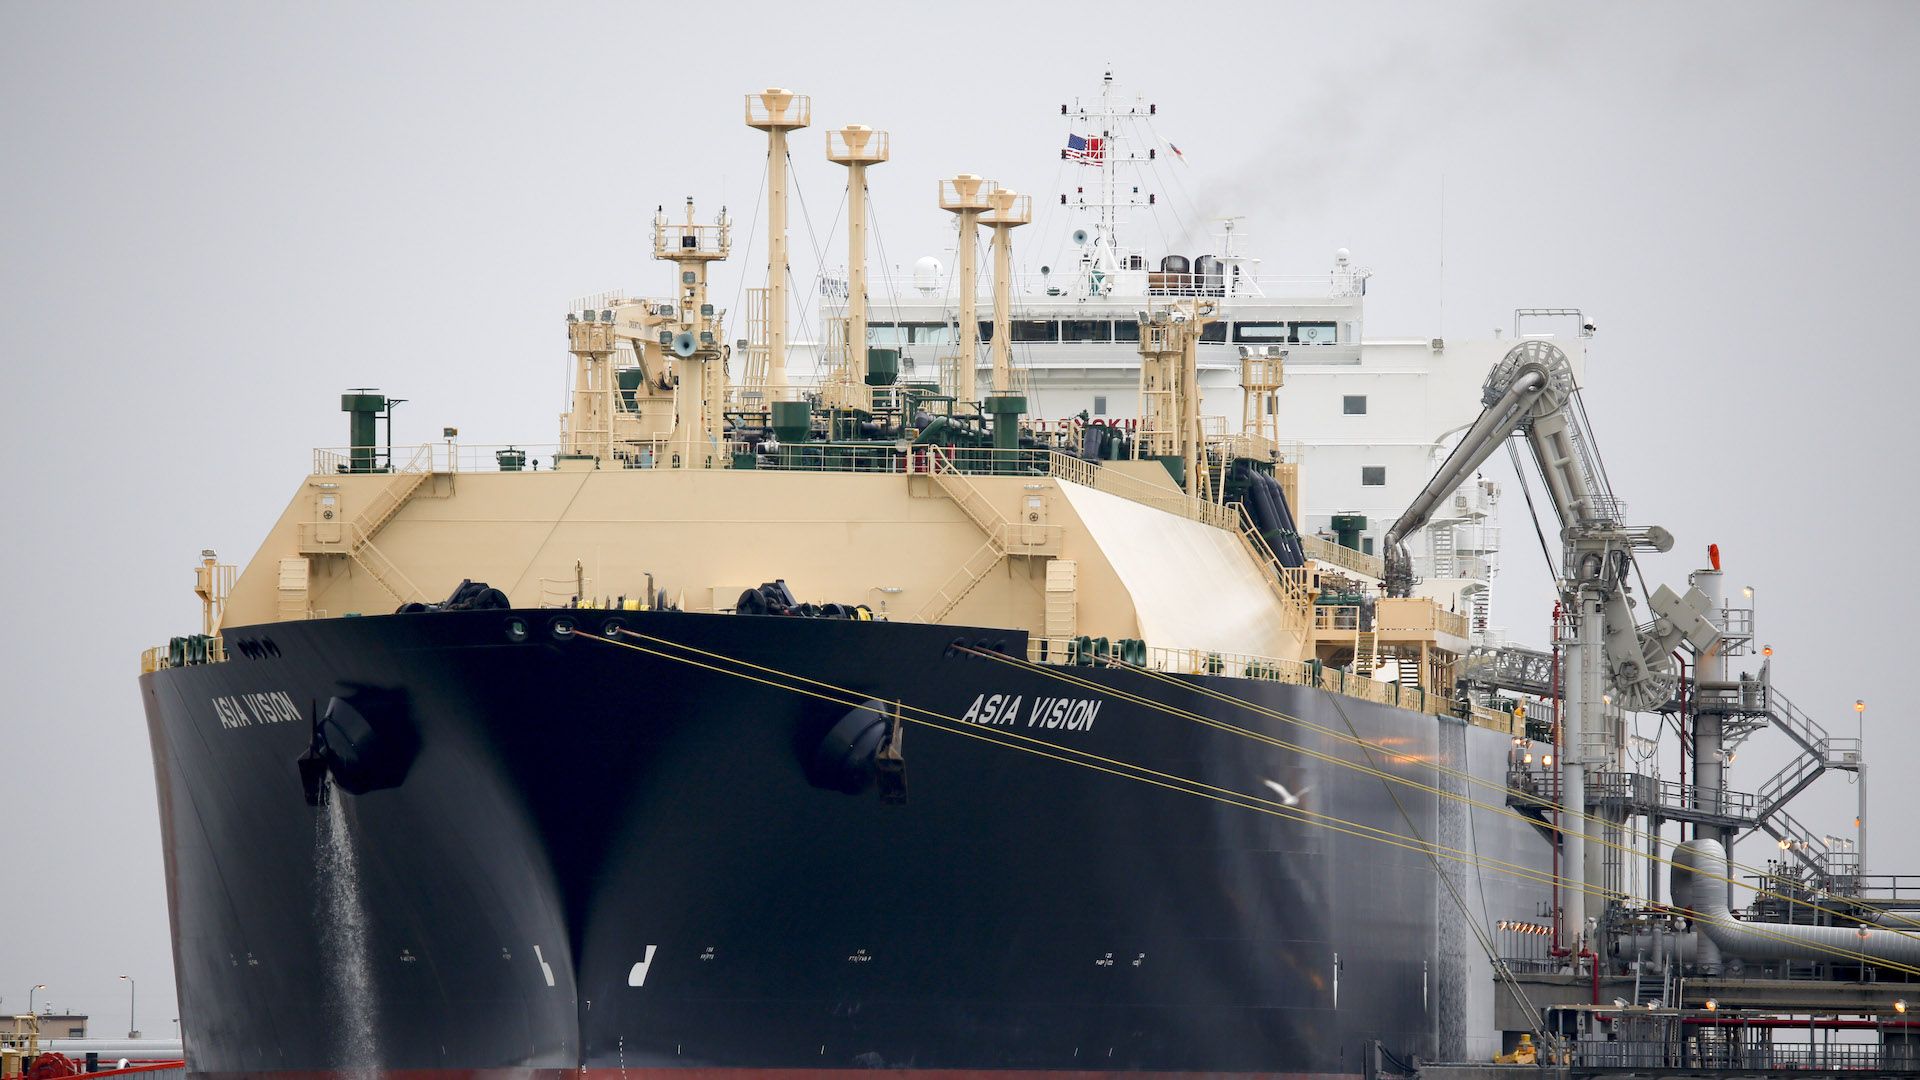 The Asia Vision LNG carrier ship